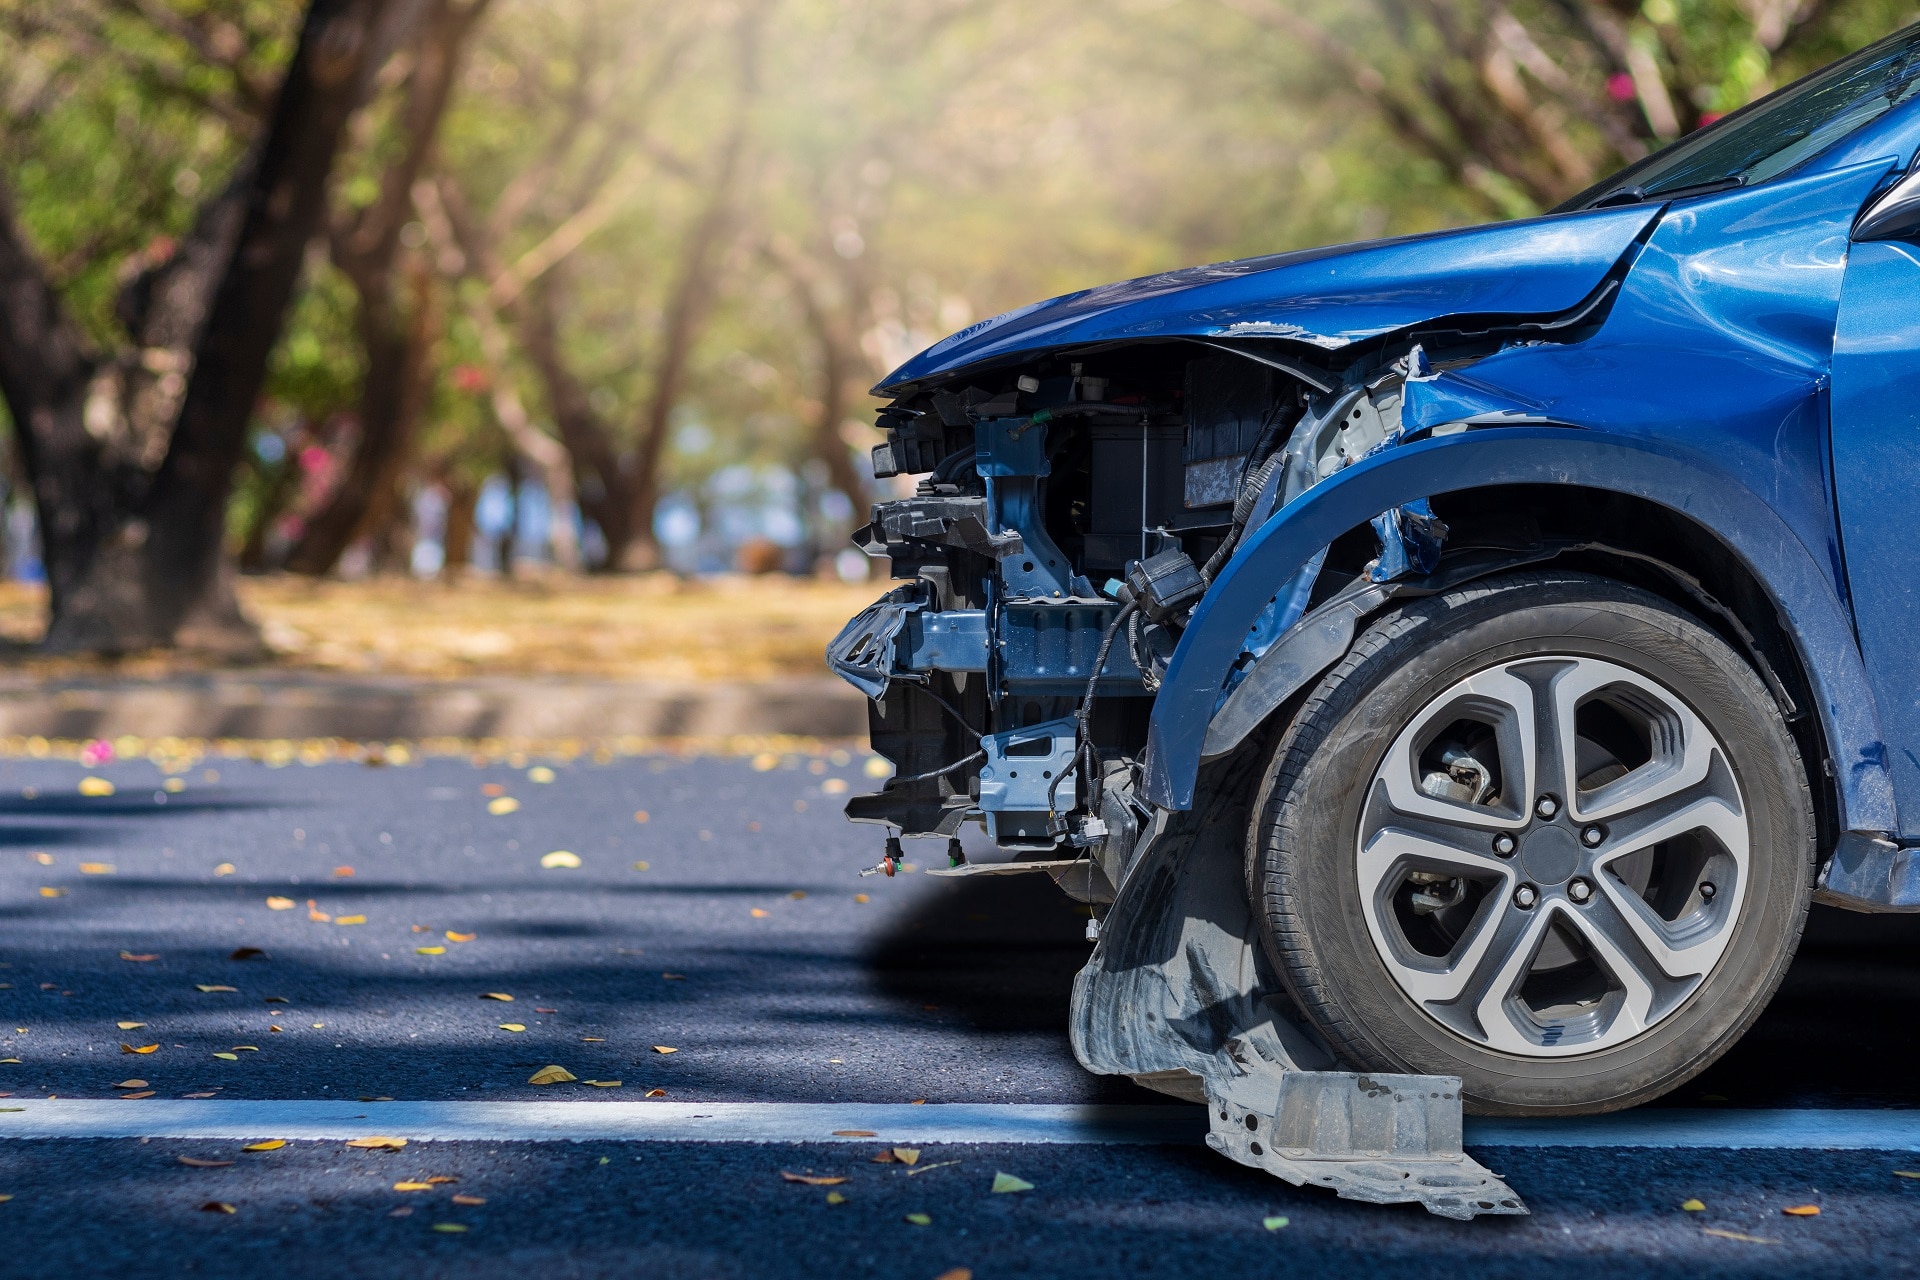 Front Of Blue Car Damaged And Broken | Motor Vehicle Accident Lawyer | Gash & Associates, P.C.